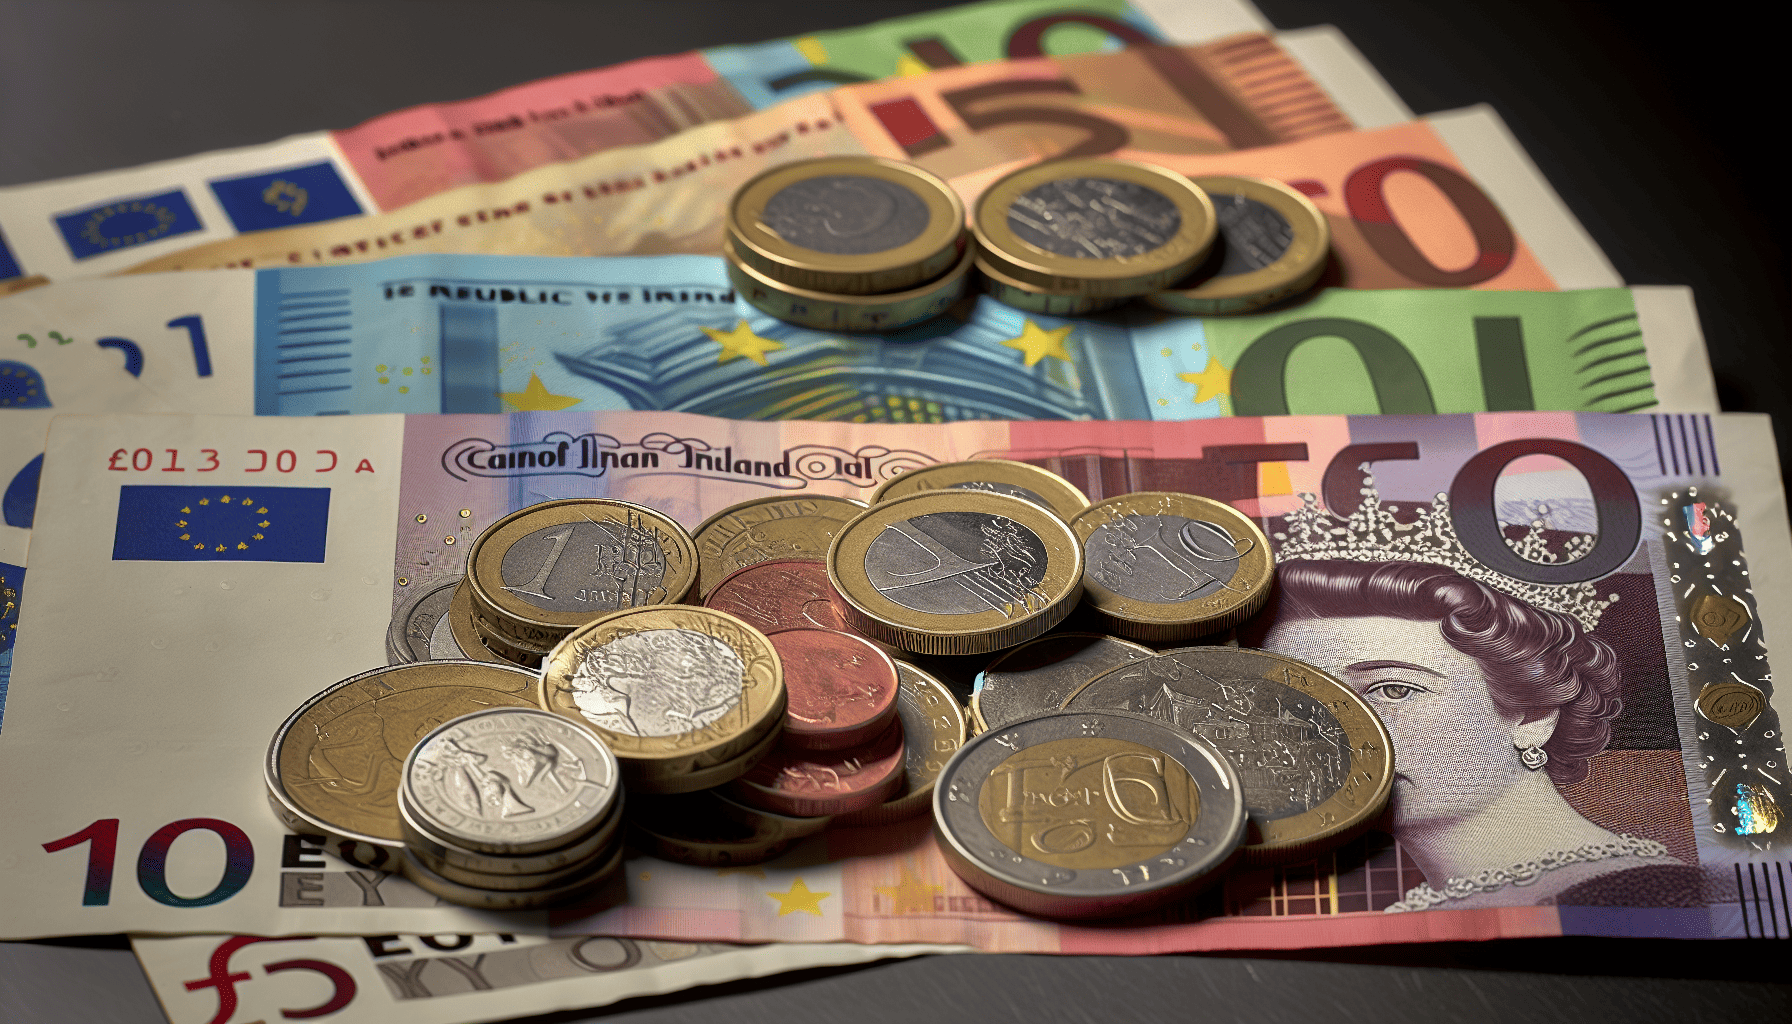 Euro banknotes and Pound Sterling coins